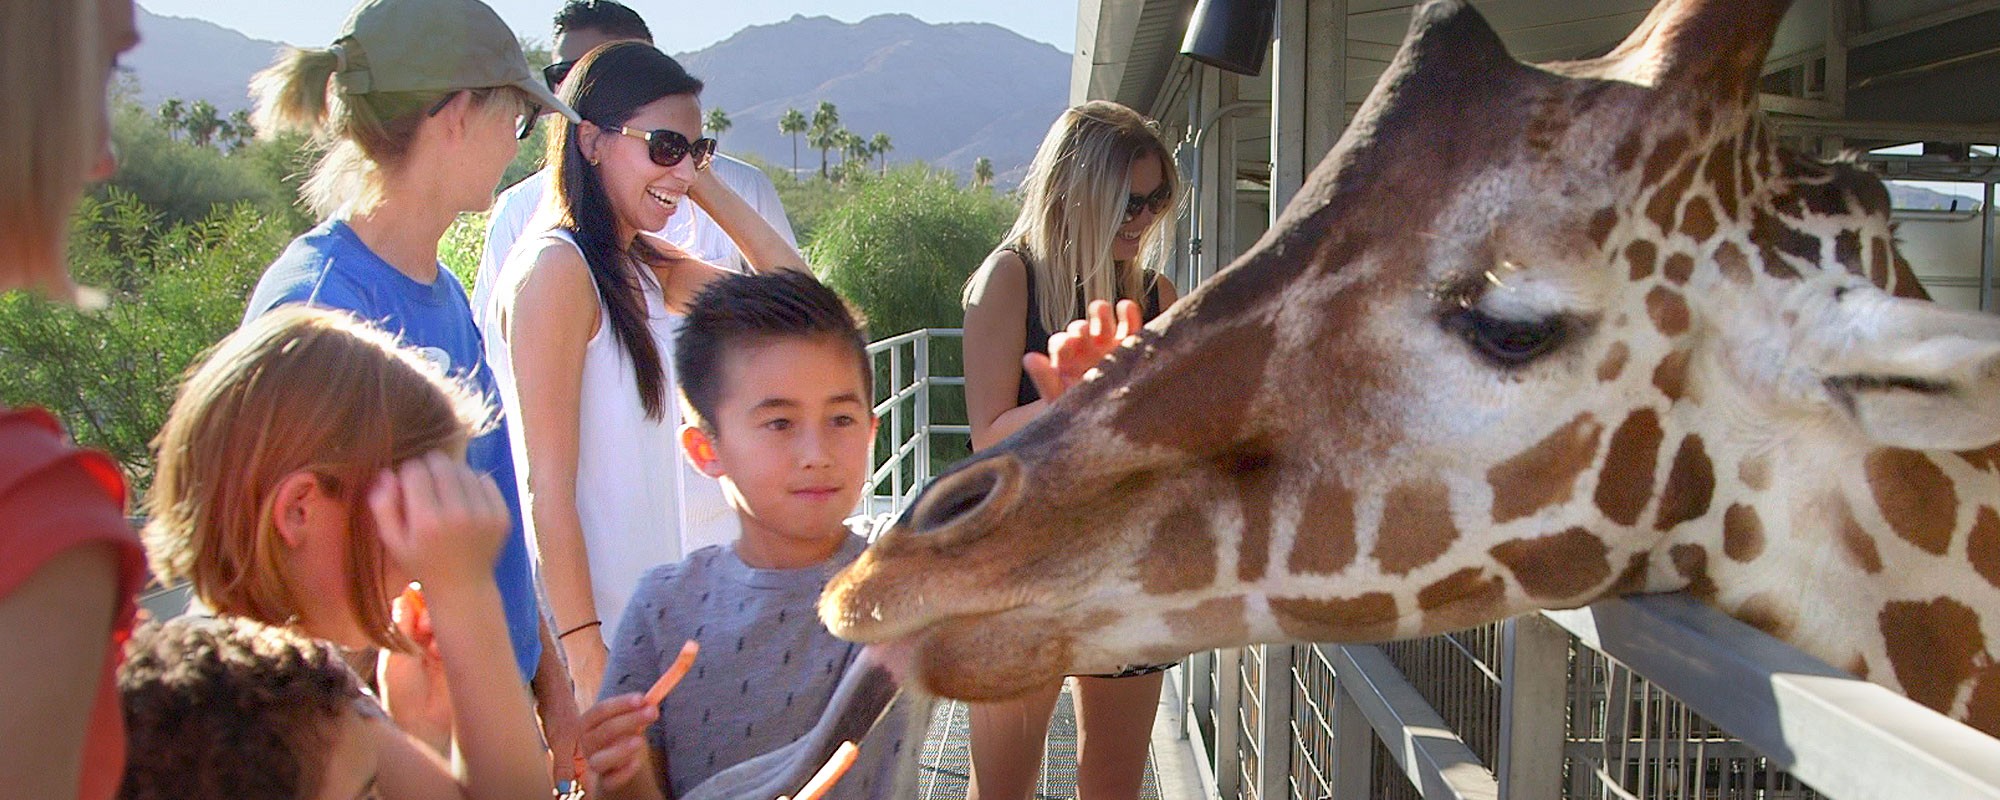 Behind the Scenes tours at The Living Desert Zoo and Gardens.